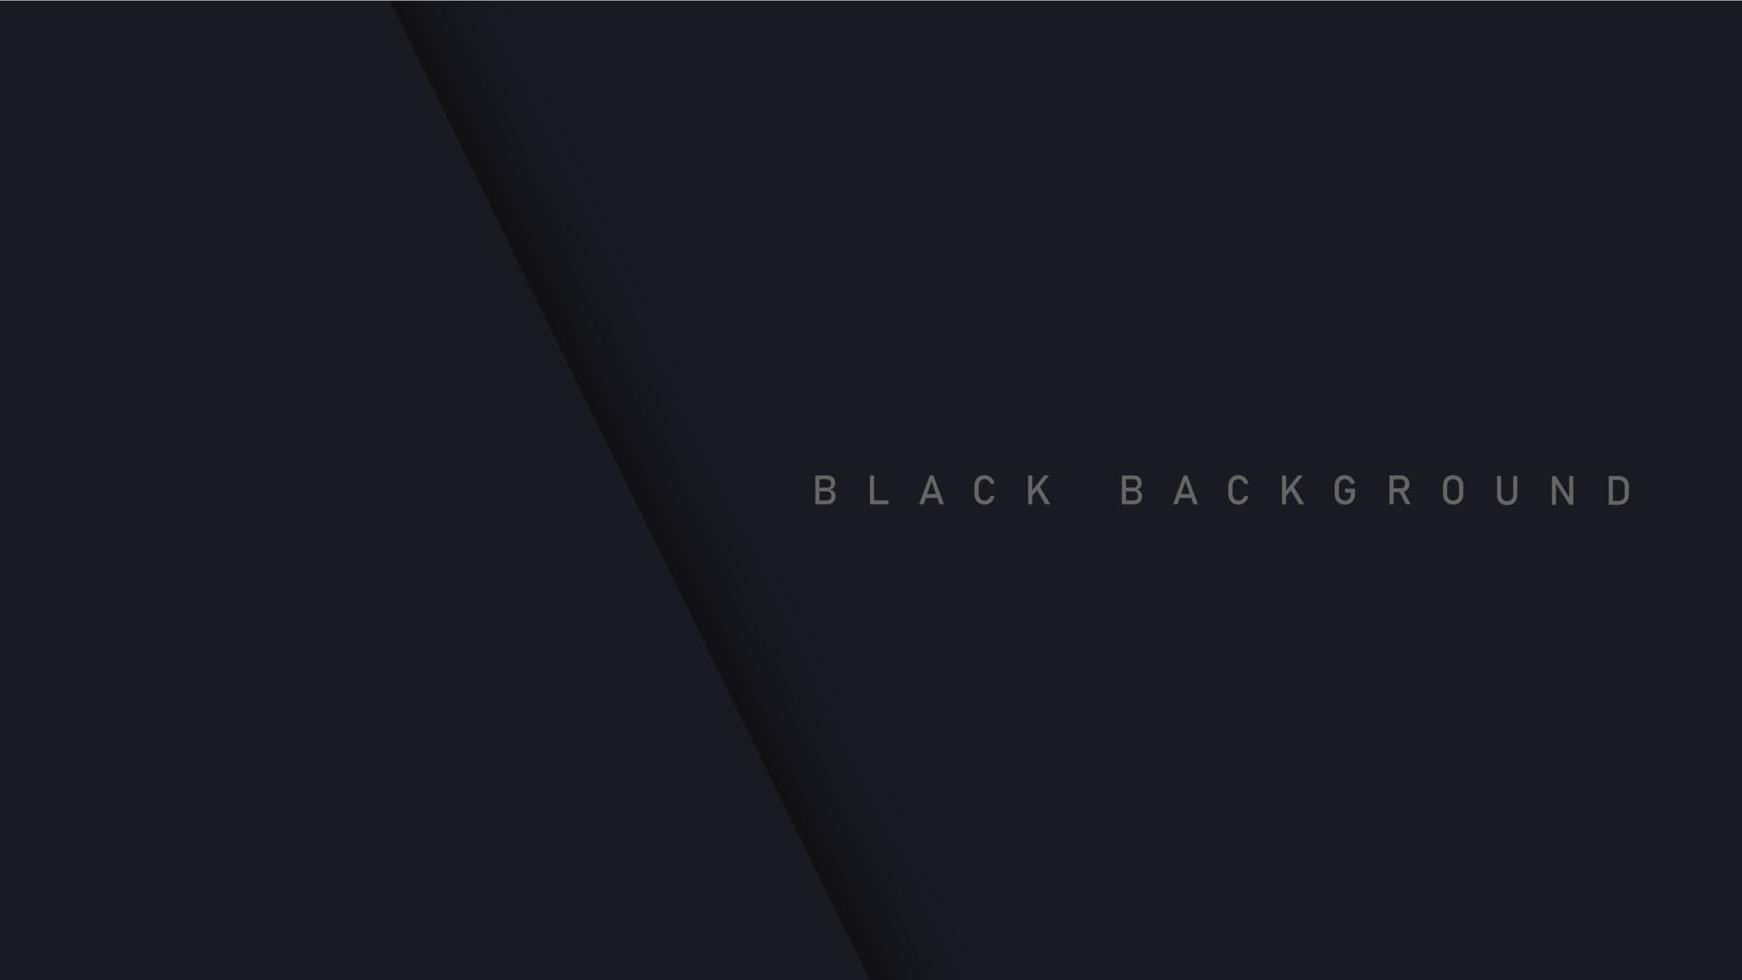 Black luxury background with shadow elements, paper concept template for your design vector